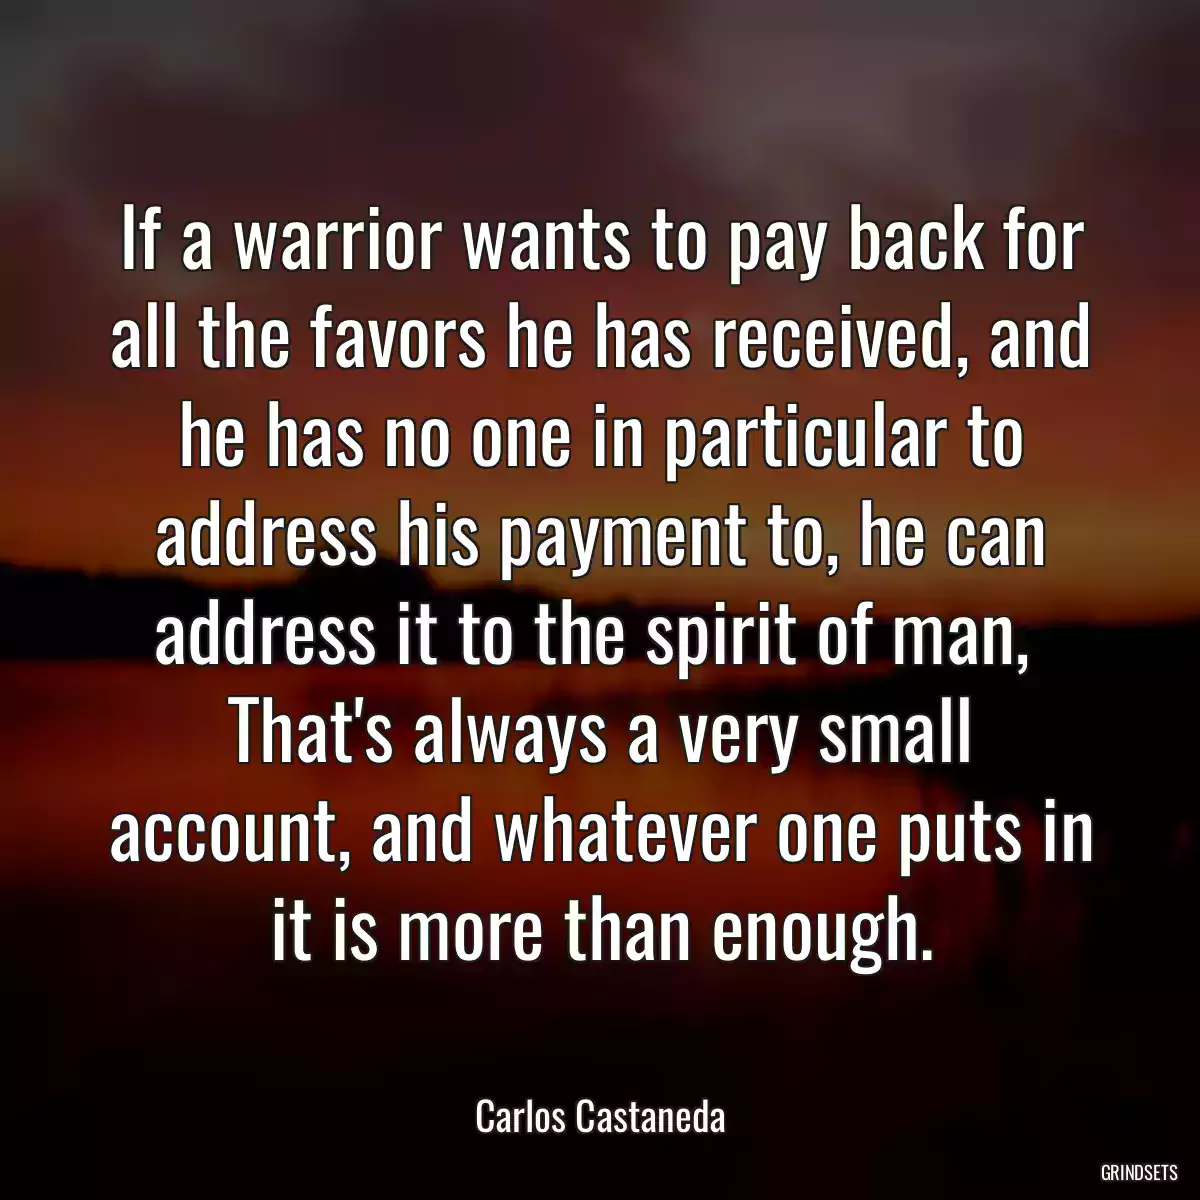 If a warrior wants to pay back for all the favors he has received, and he has no one in particular to address his payment to, he can address it to the spirit of man,  That\'s always a very small account, and whatever one puts in it is more than enough.